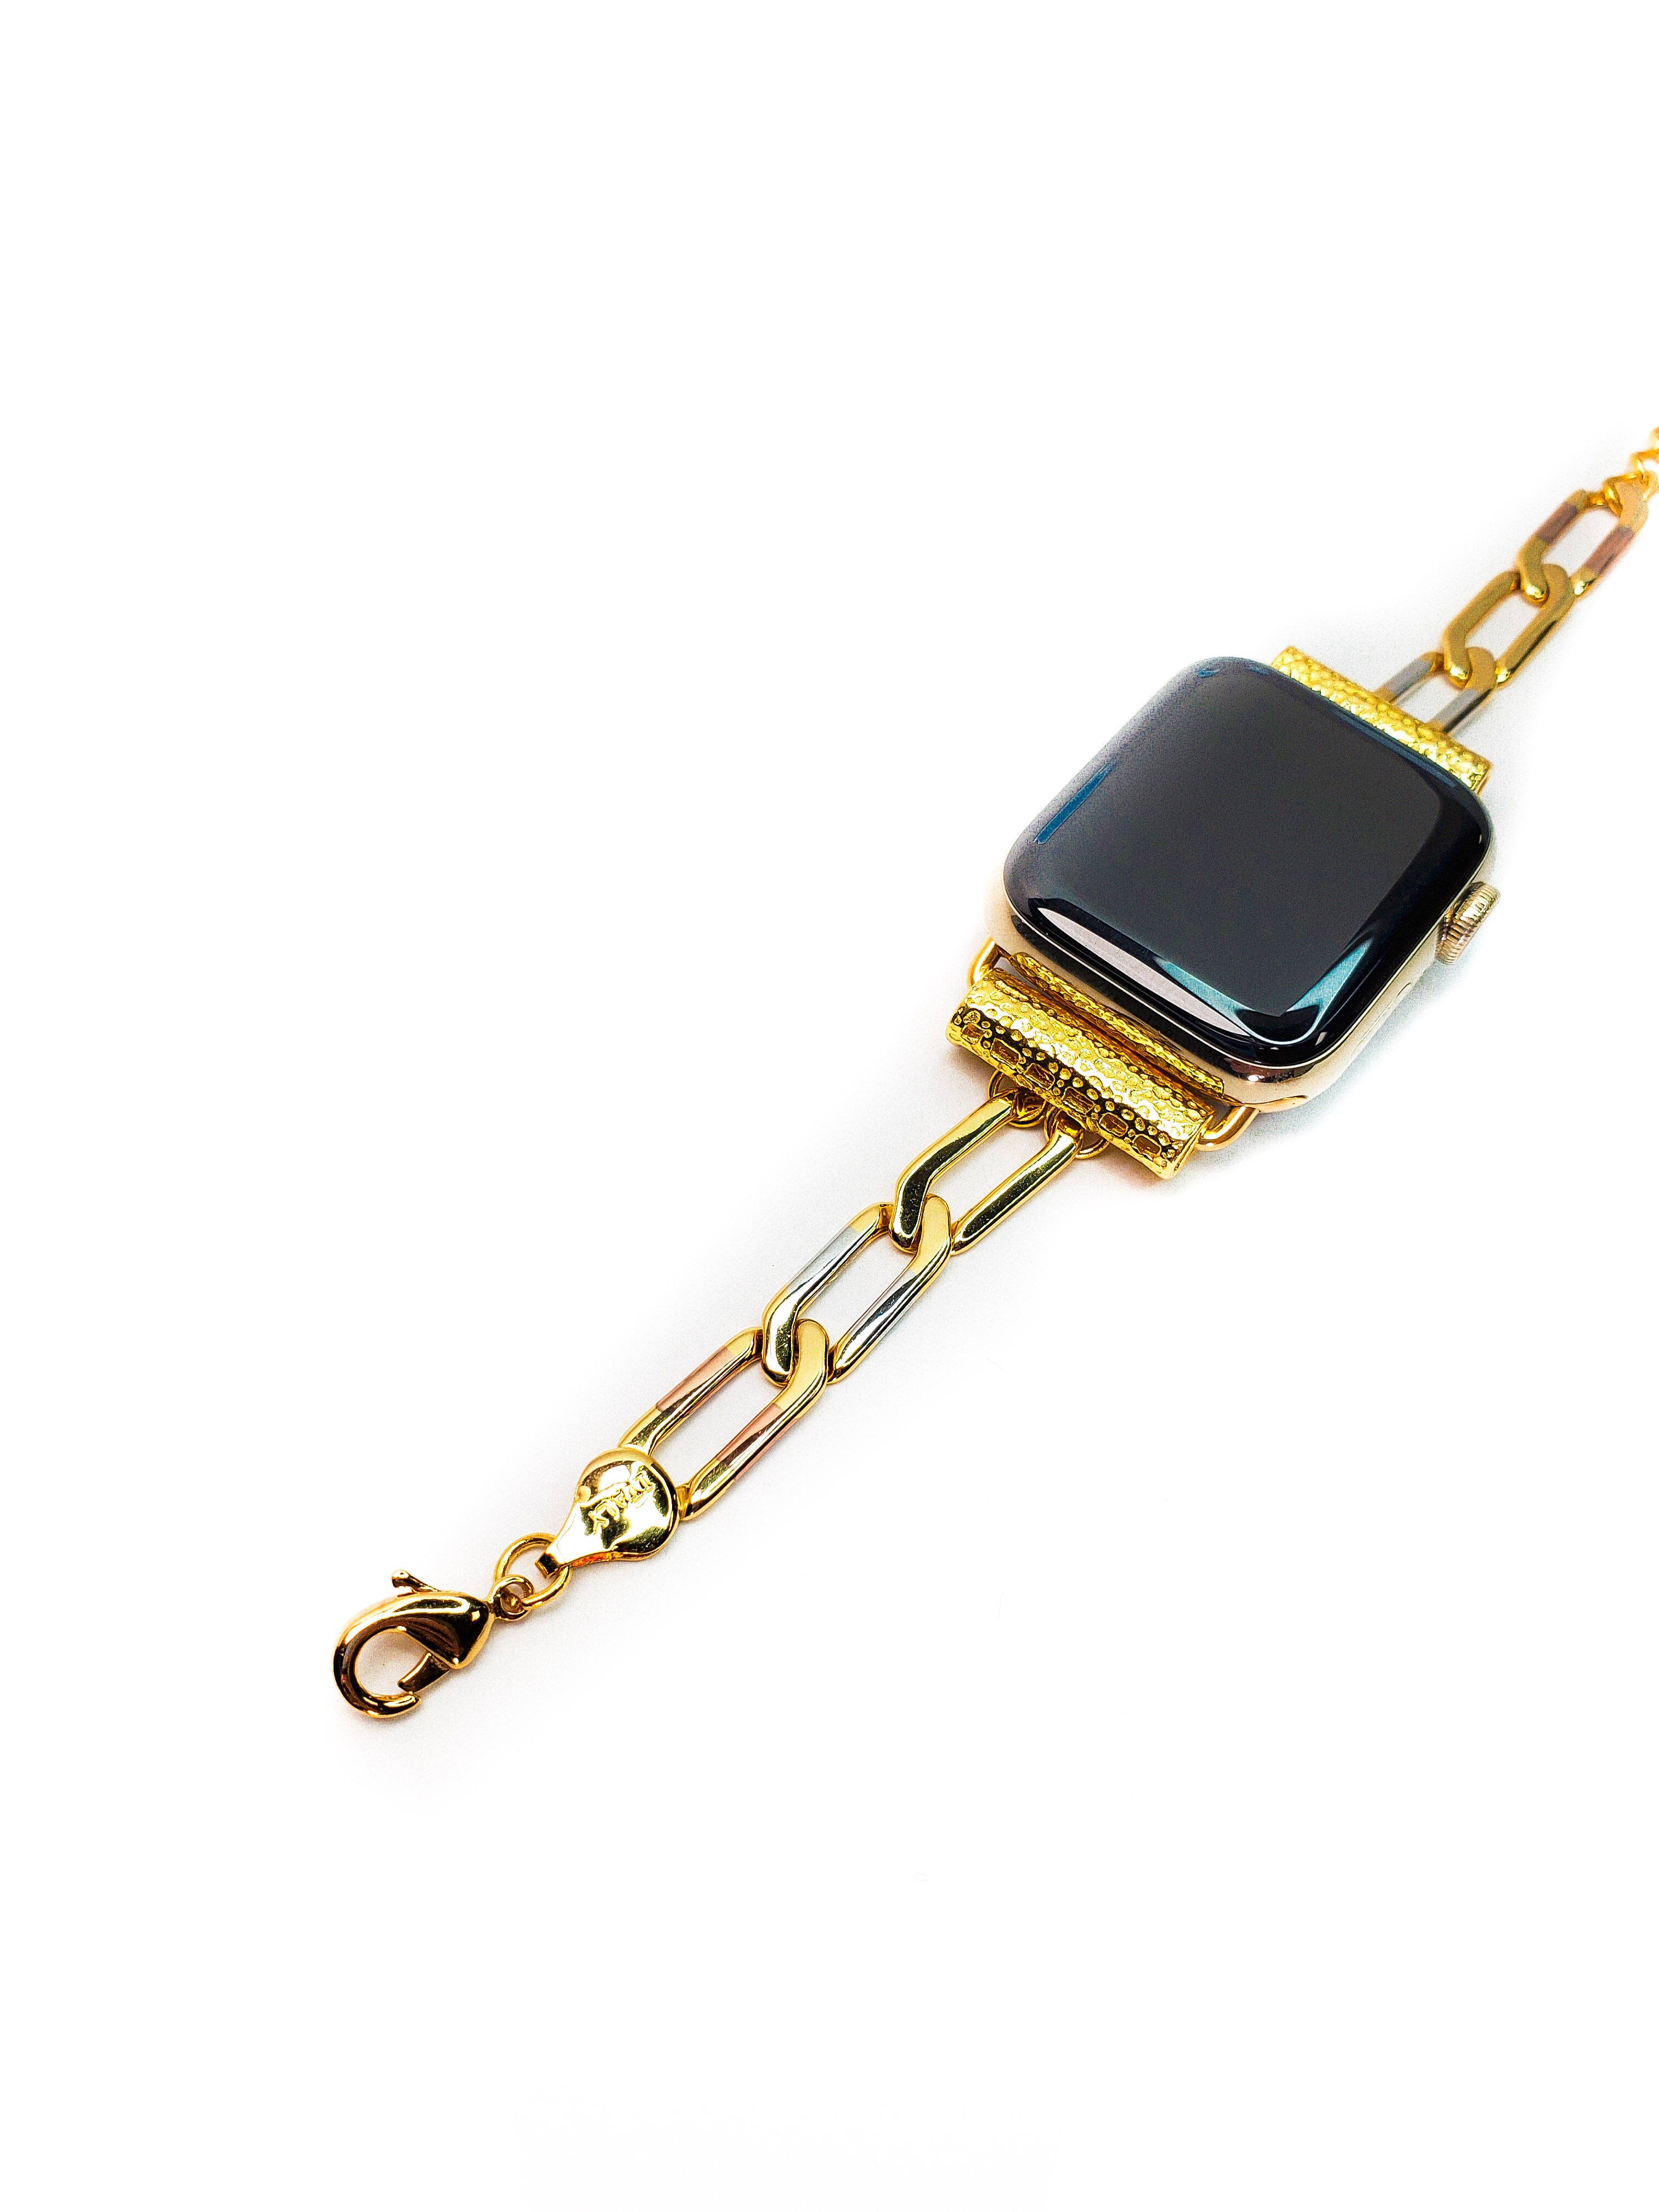 CEPIE Tricolor Link Chain Watch Bracelet Band for Apple Watch